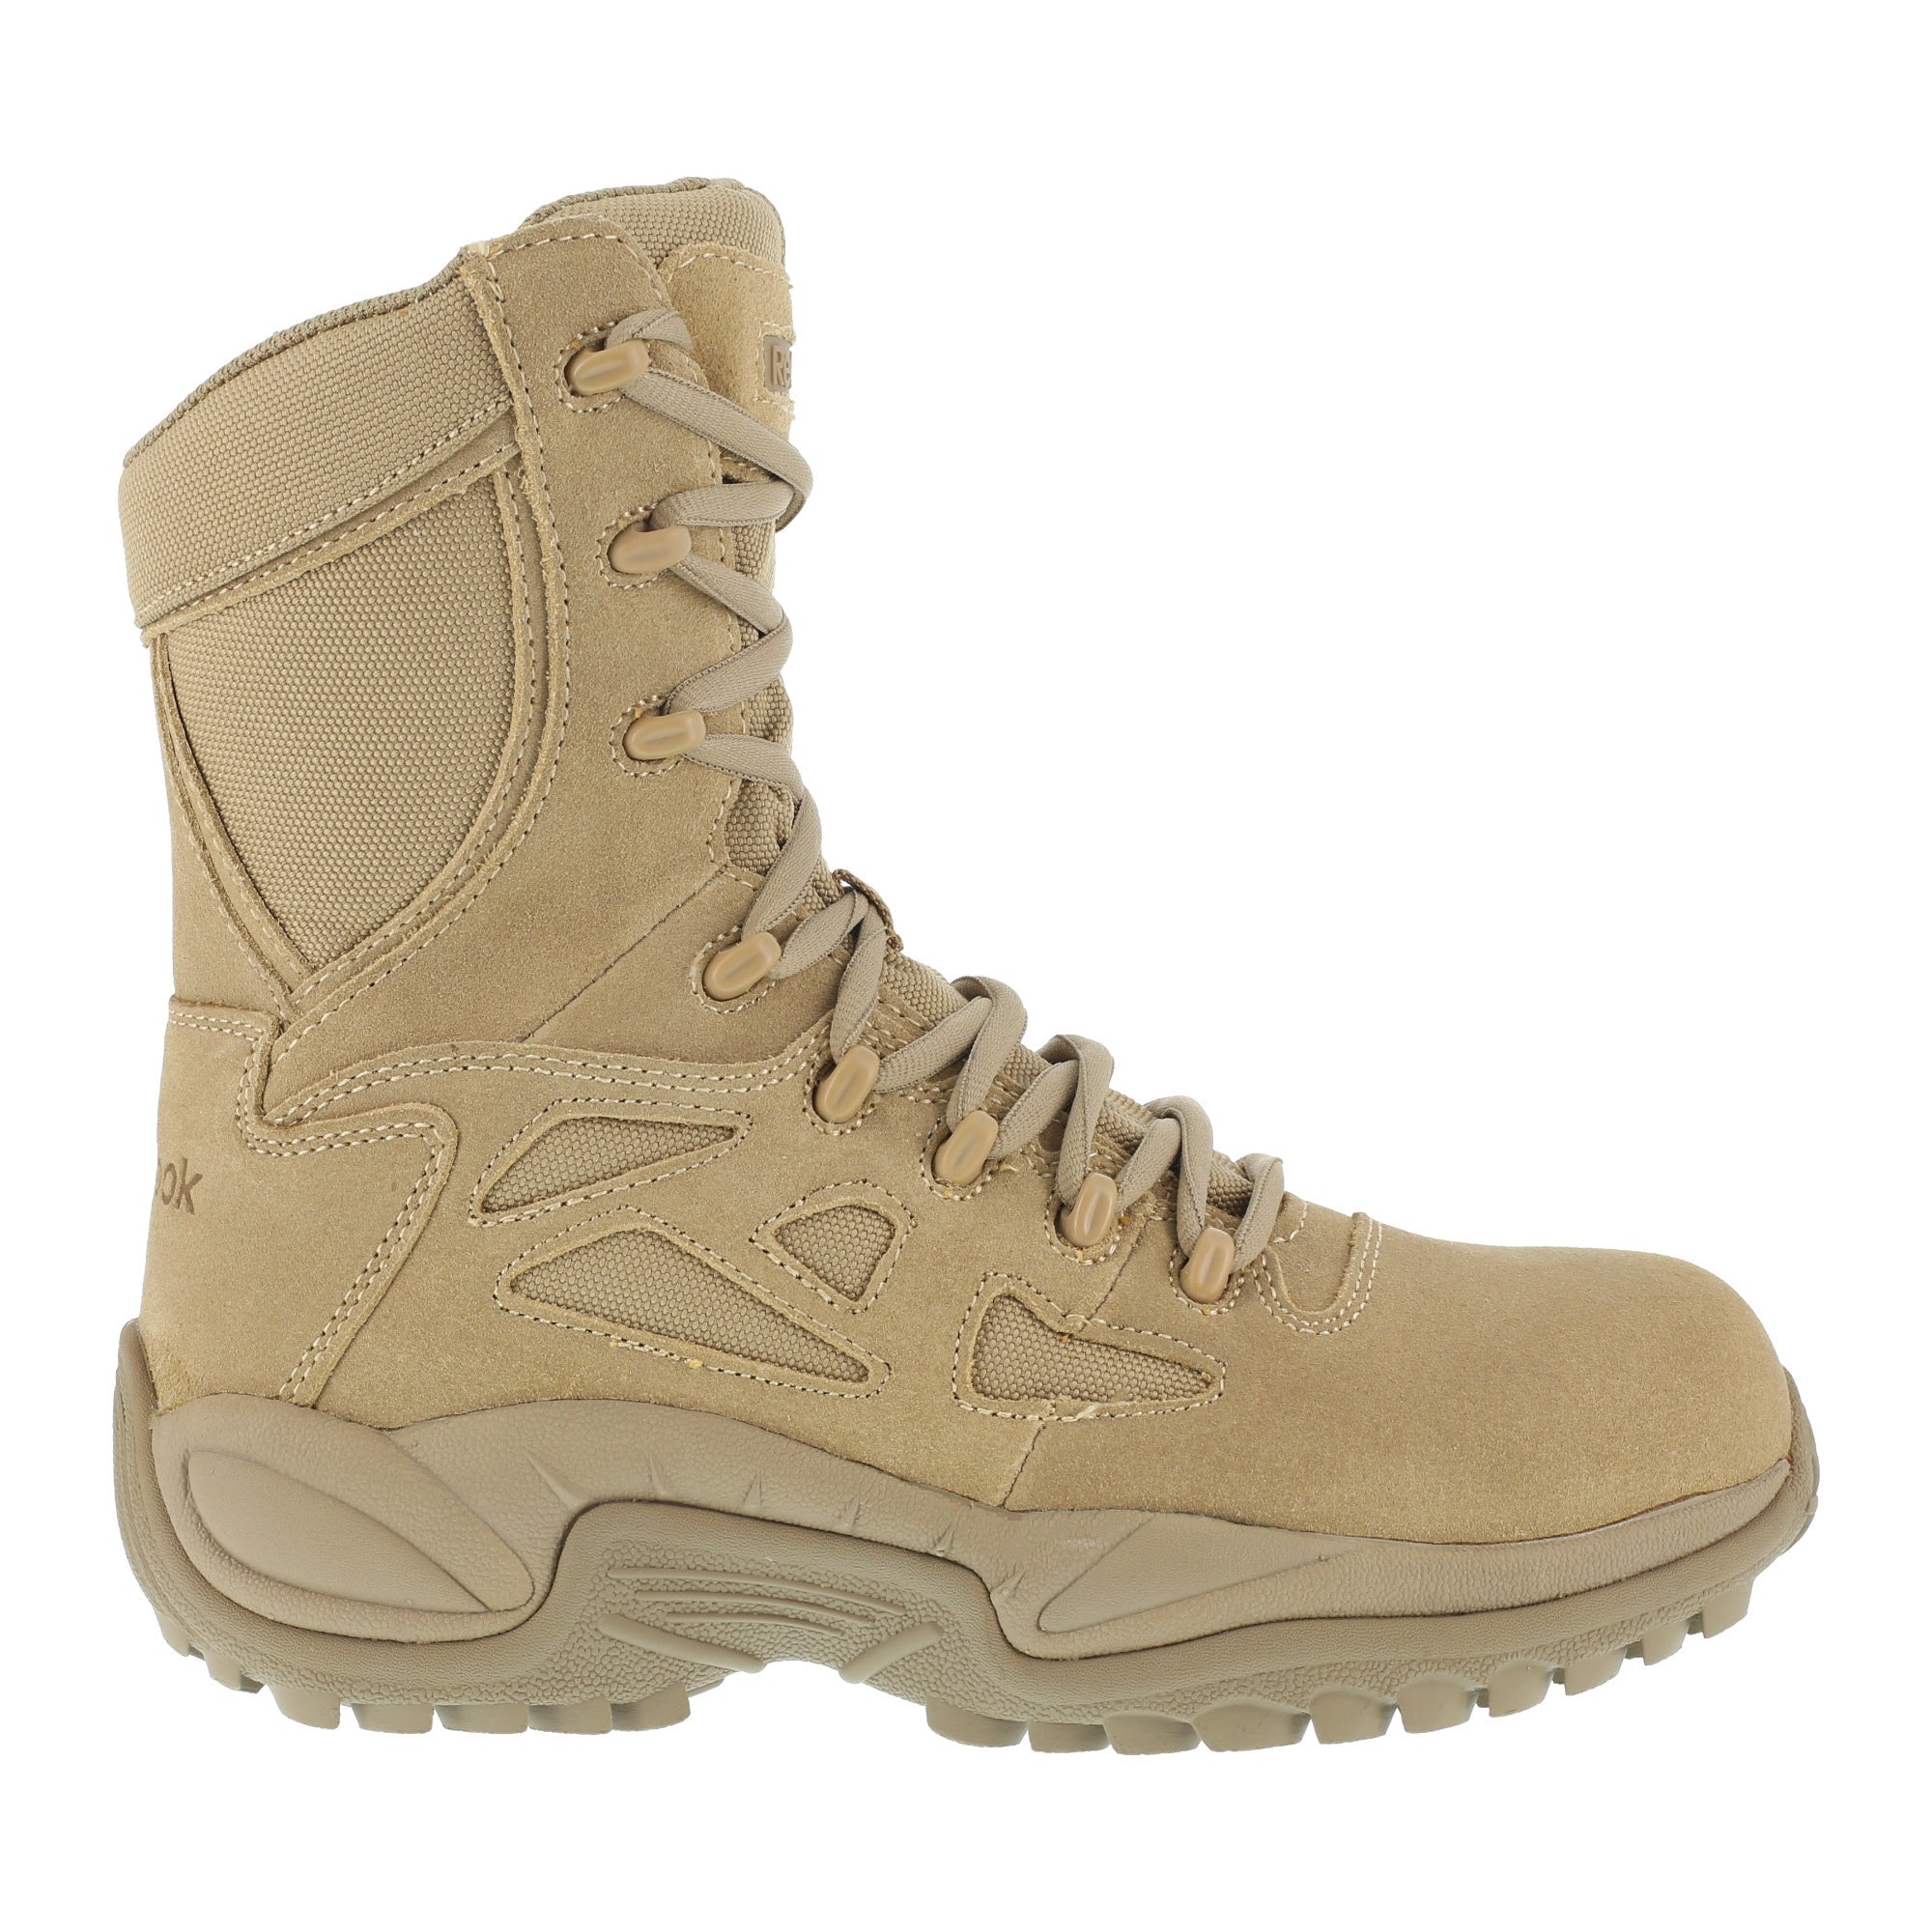 Reebok Mens Desert Tan Suede Tactical Boots Rapid Response Side – The Western Company